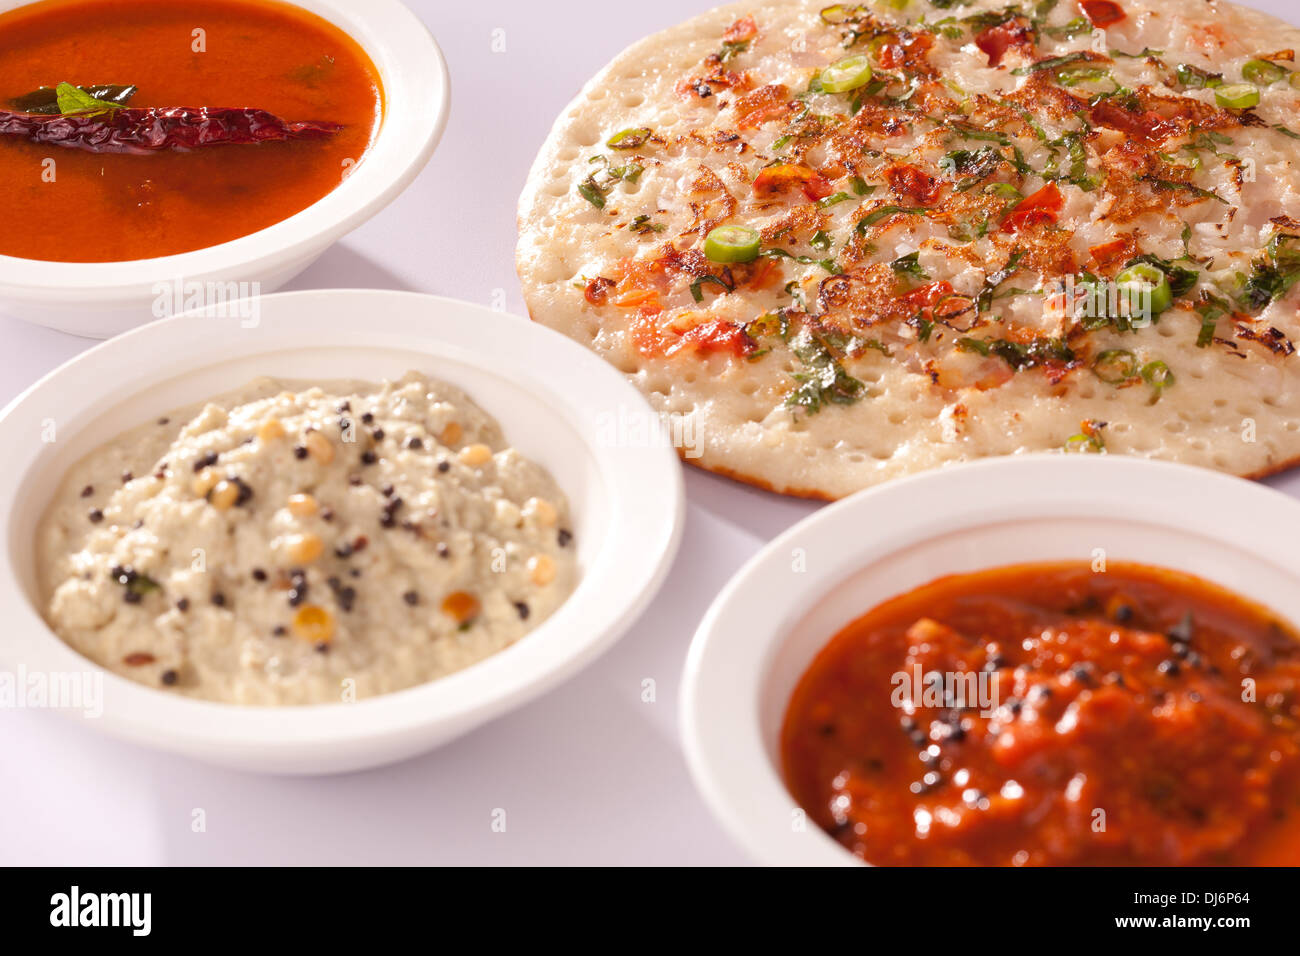 Onion Dosa - A spicy pancake from South India. Stock Photo